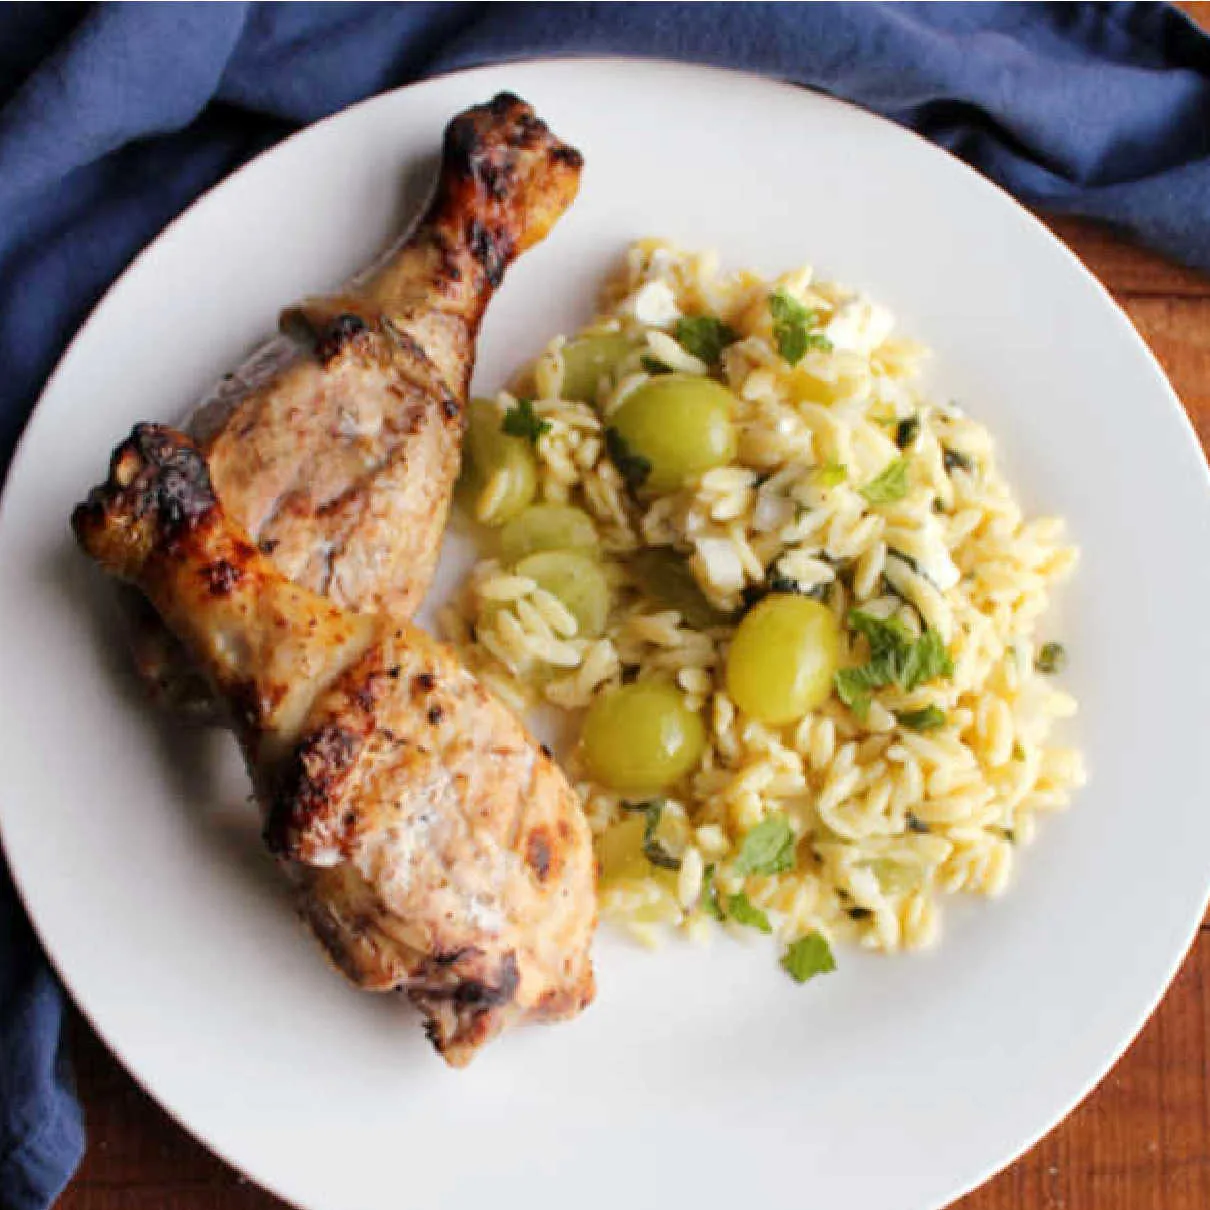 grilled chicken on plate with orzo pasta salad.